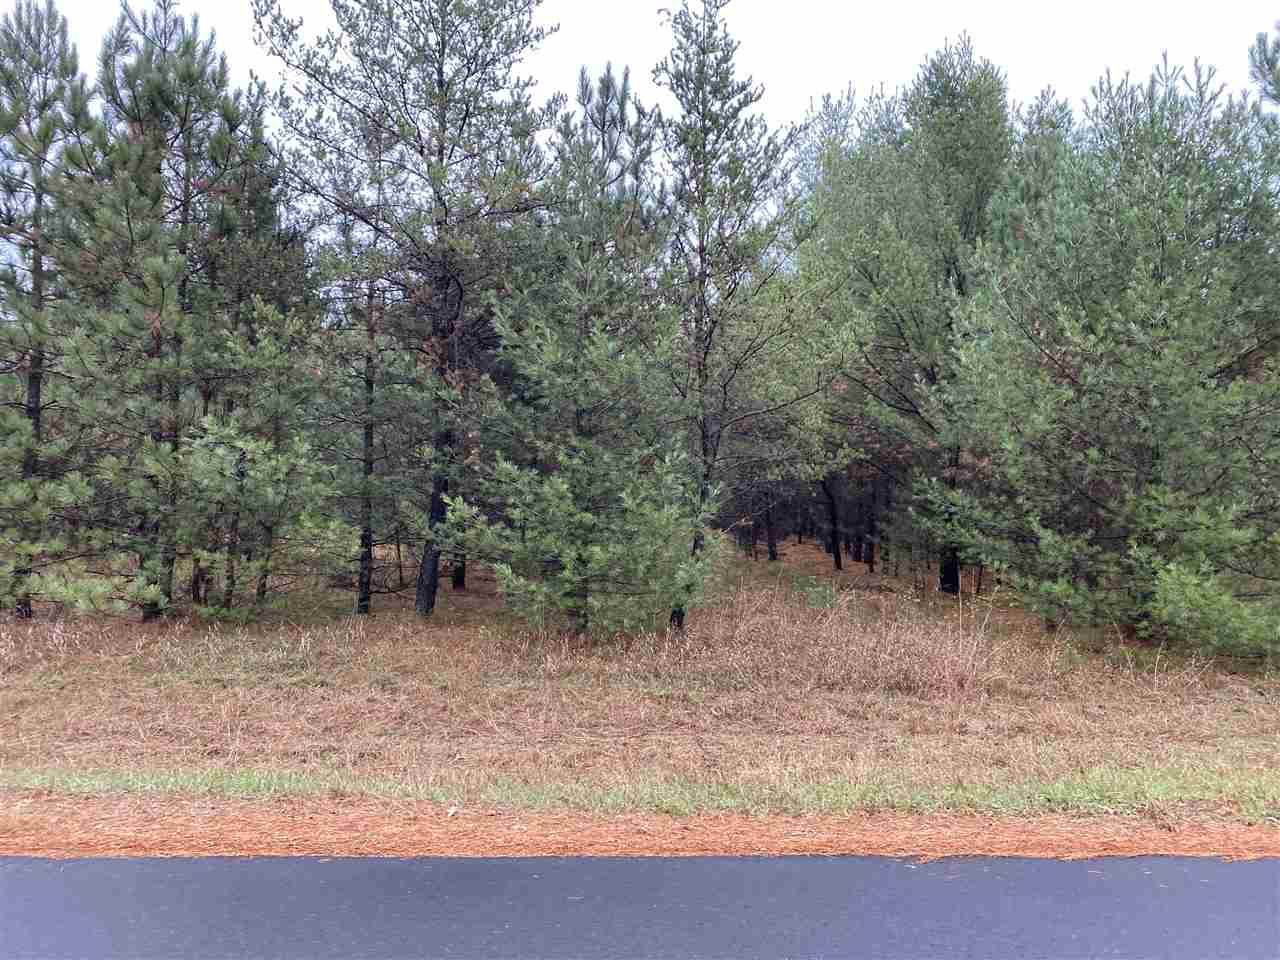 8.07 Acres 48TH STREET SOUTH #Lot 2 of WCCSM 10787, Lot 2 of WCCSM 10787, Wisconsin Rapids, WI 54494